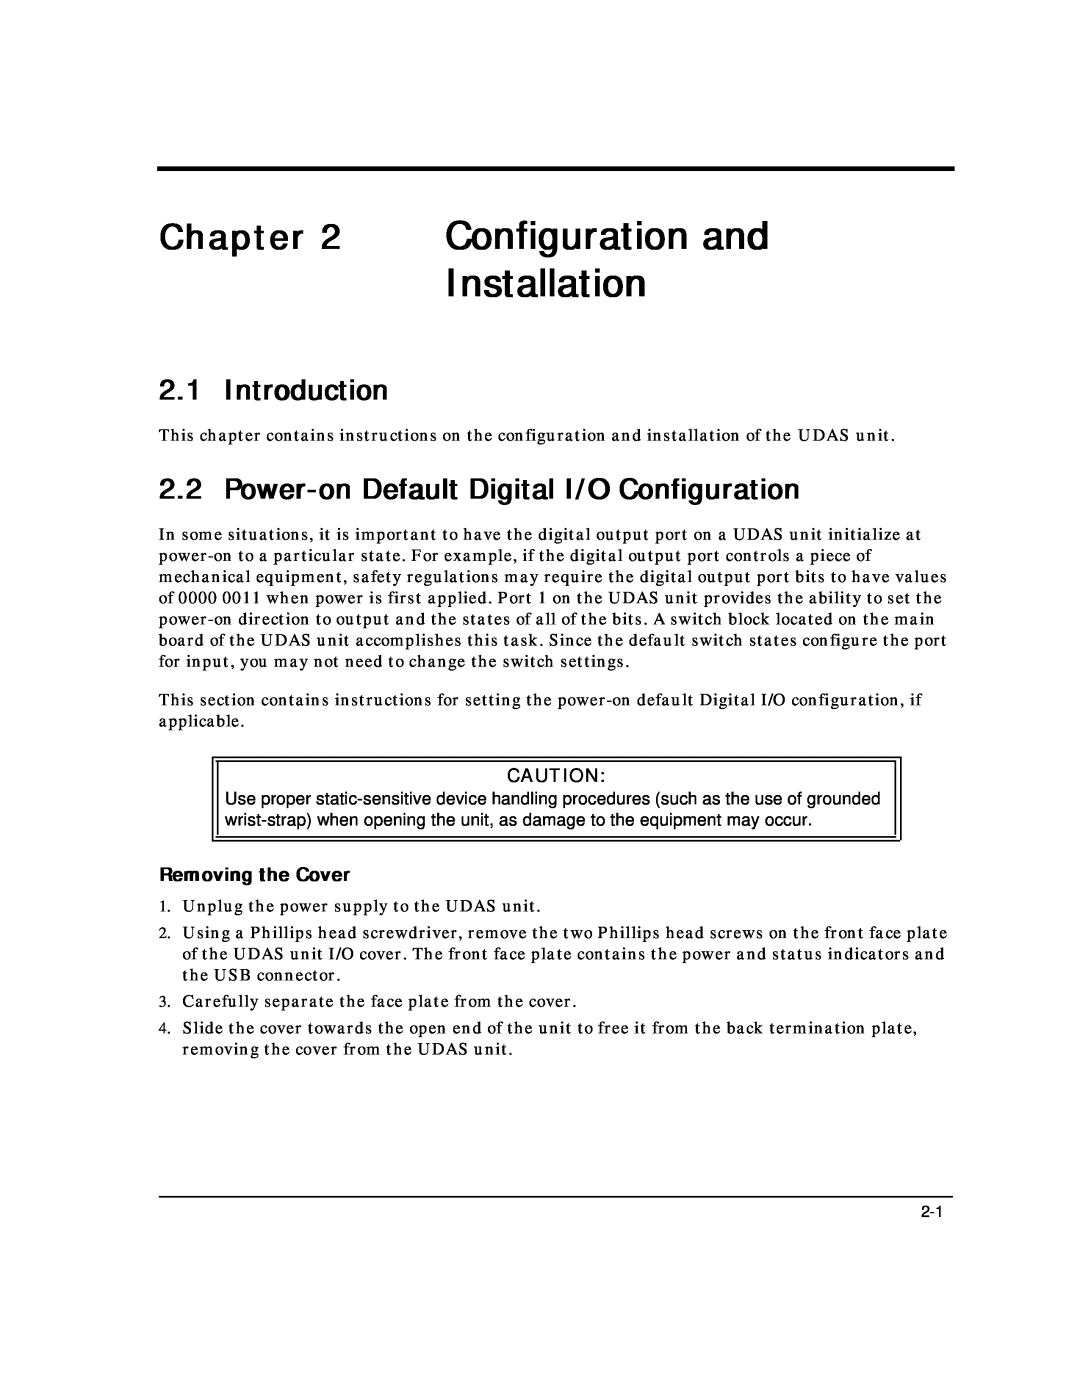 Intelligent Motion Systems UDAS-1001E user manual Configuration and Installation, Introduction, Removing the Cover, Chapter 